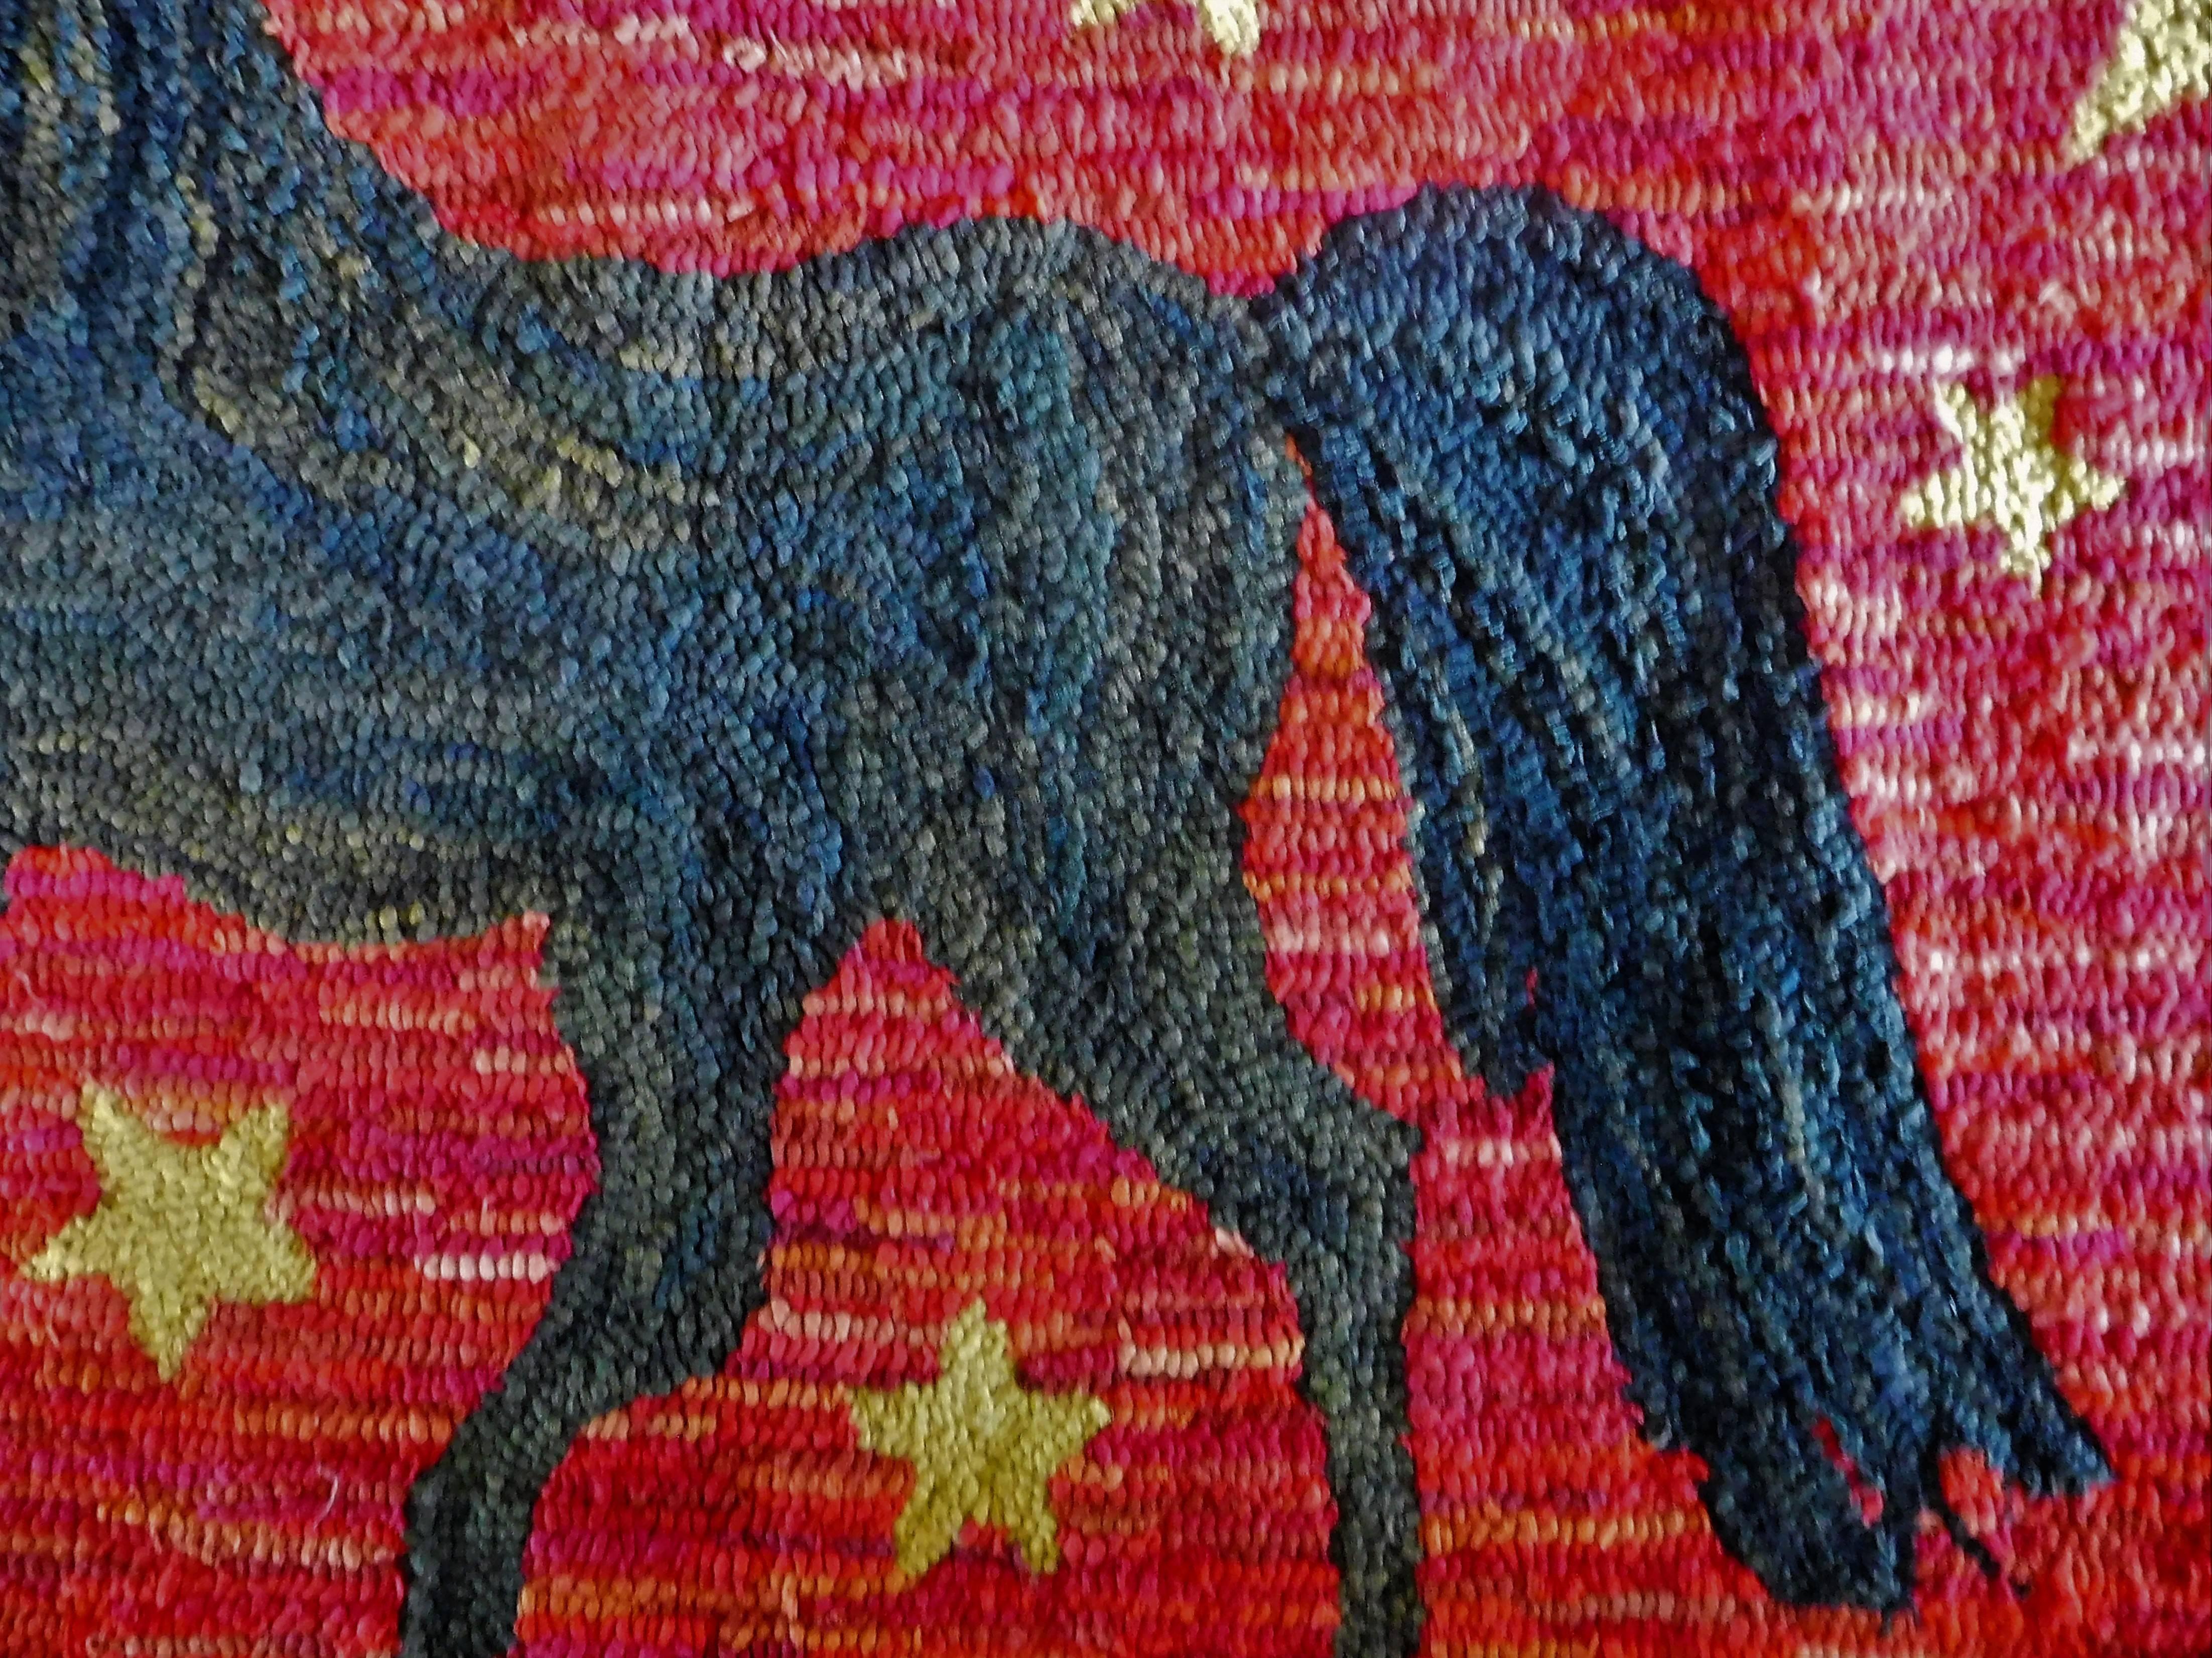 Prancing Morgan Horse on a Hooked Hearth Rug, American Folk Art, 19th Century For Sale 2